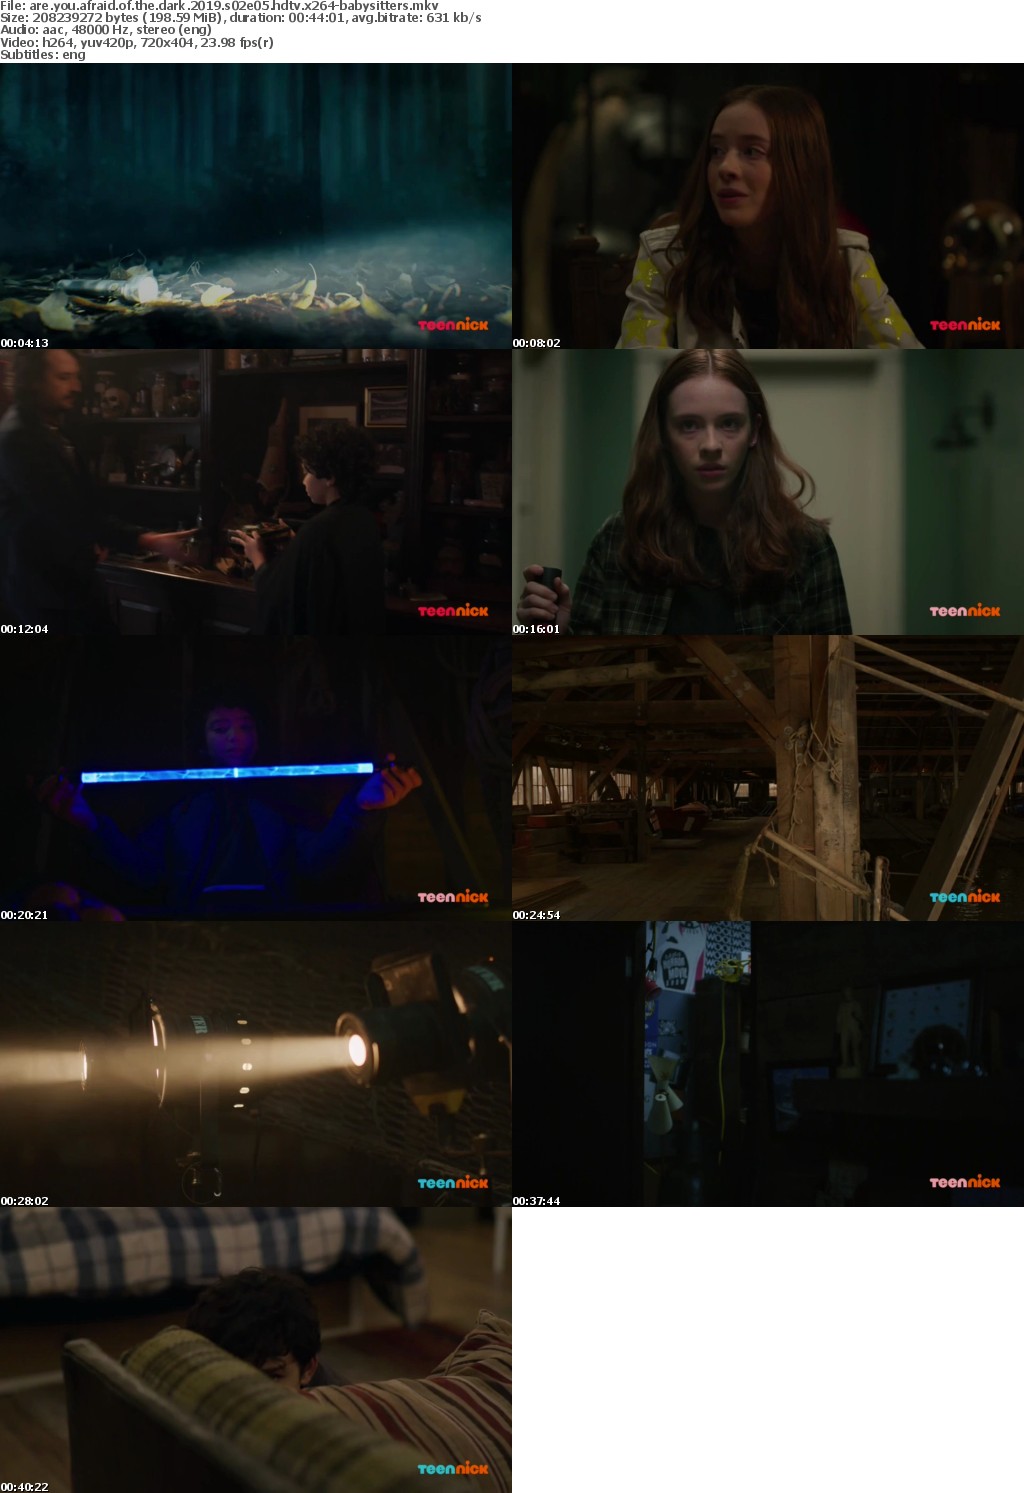 Are You Afraid of the Dark 2019 S02E05 HDTV x264-BABYSITTERS